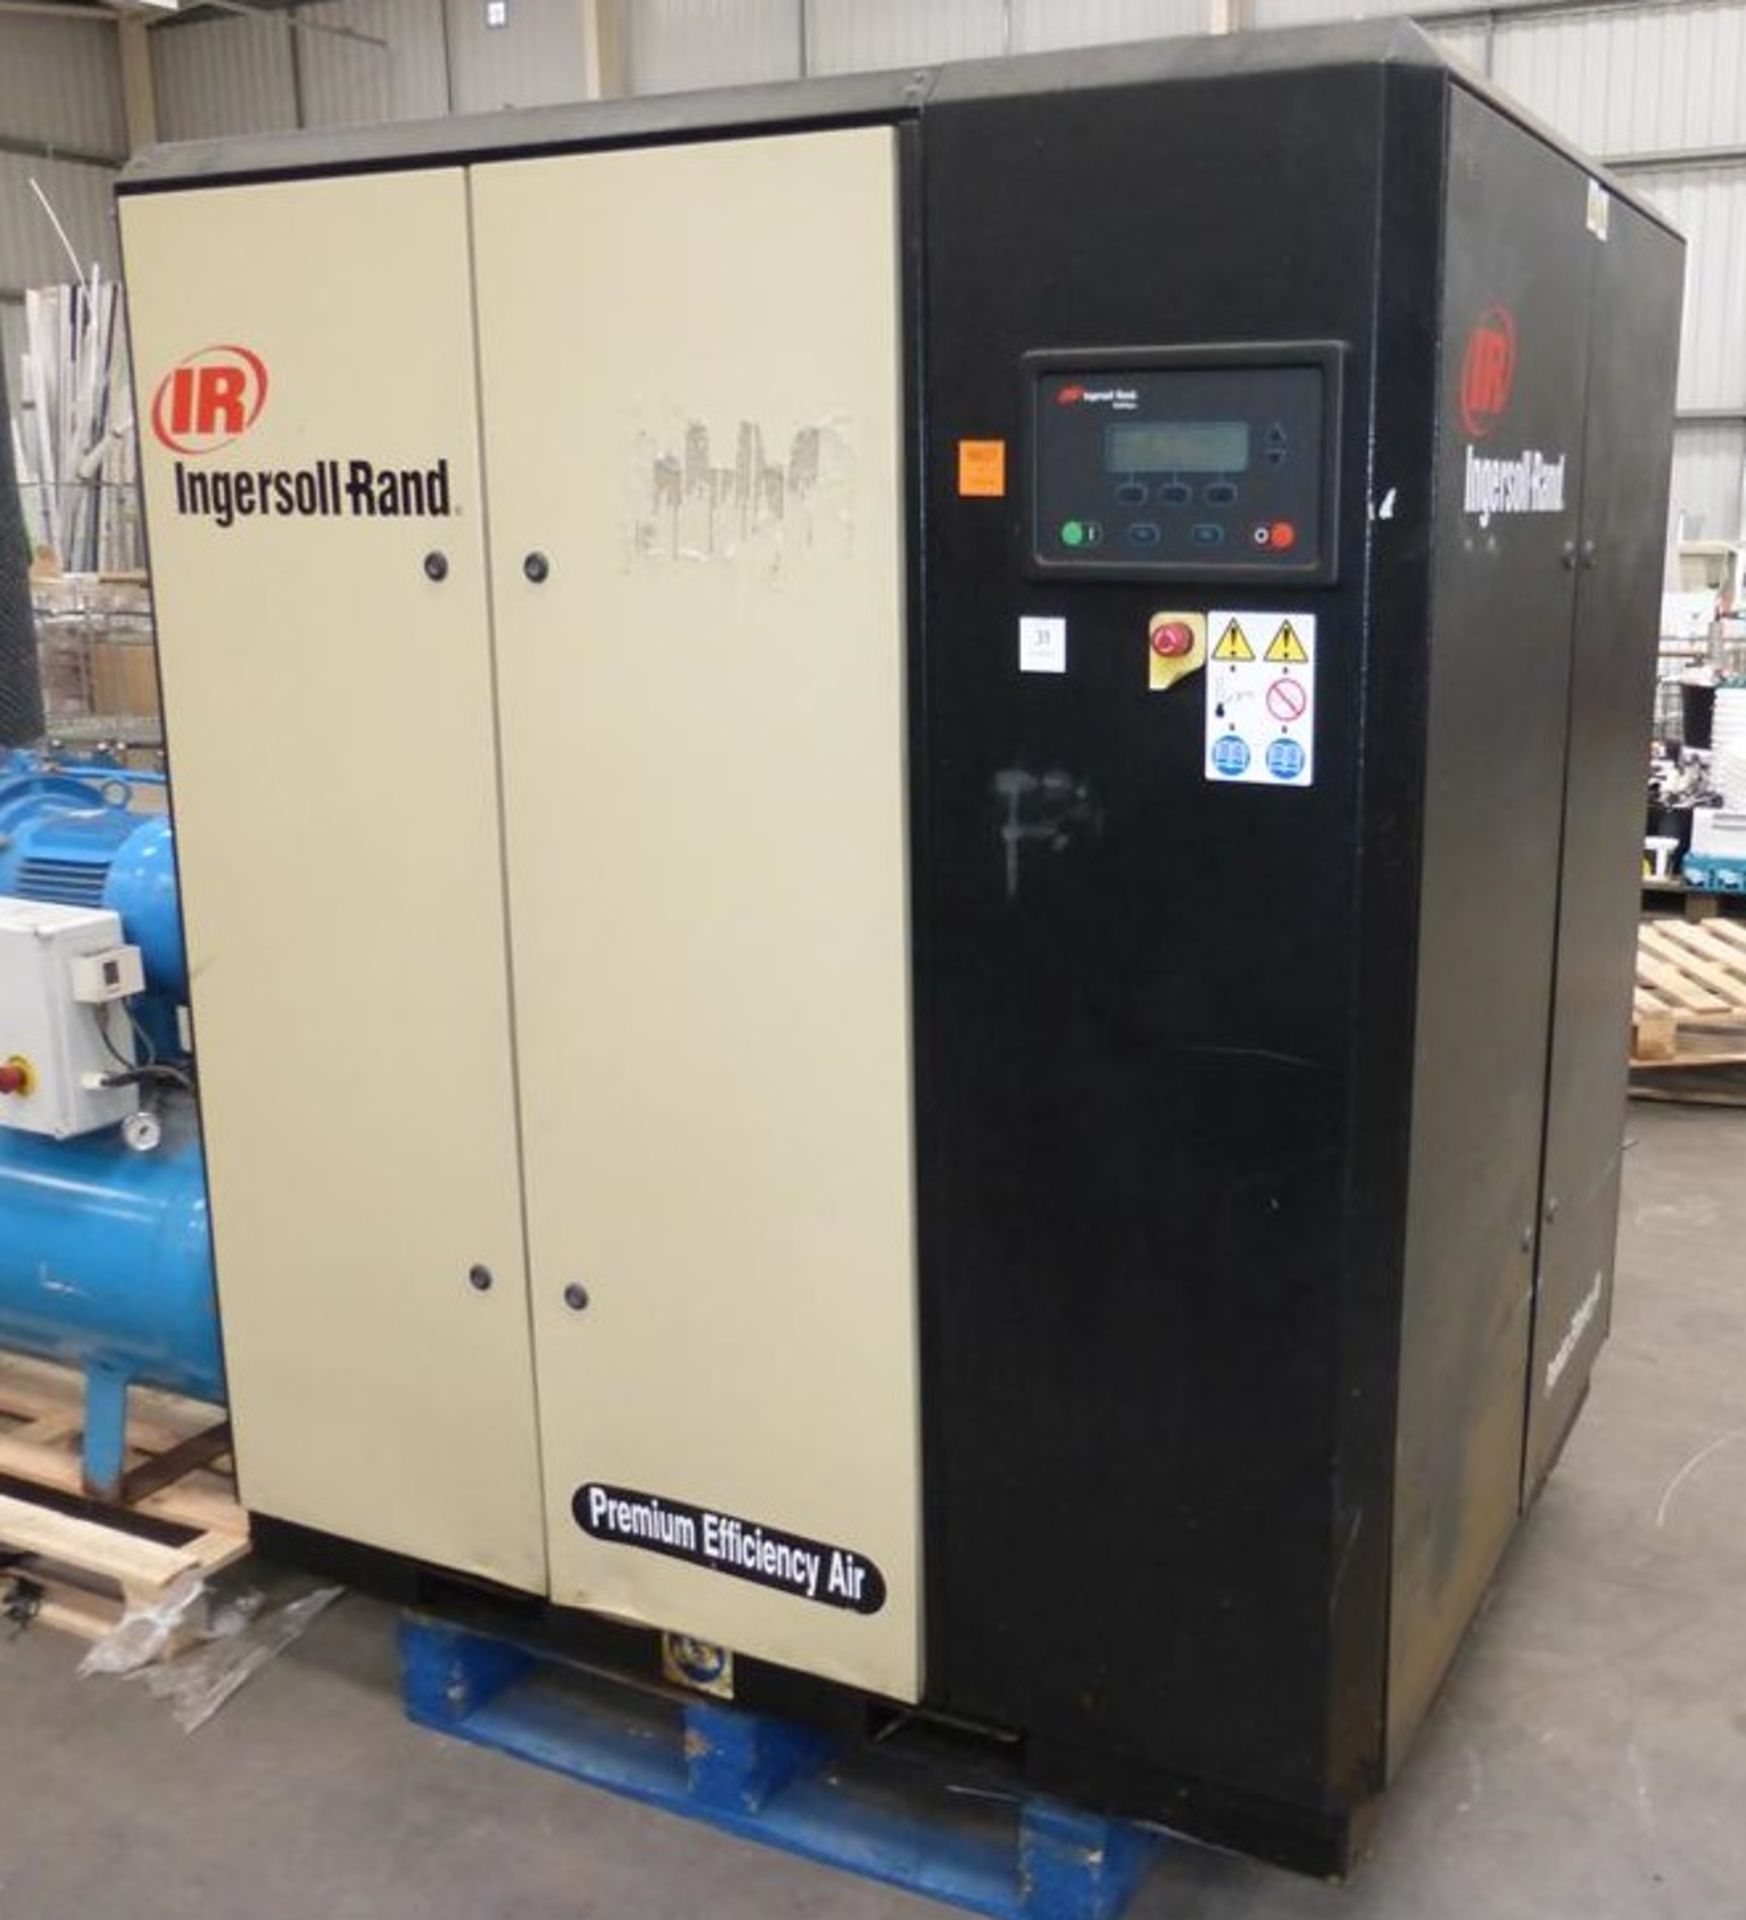 * Inggrsoll Rand Nirvana N37 Screw Compressor 10Bar 37kW 3Ph. Please note there is a £5 + VAT lift